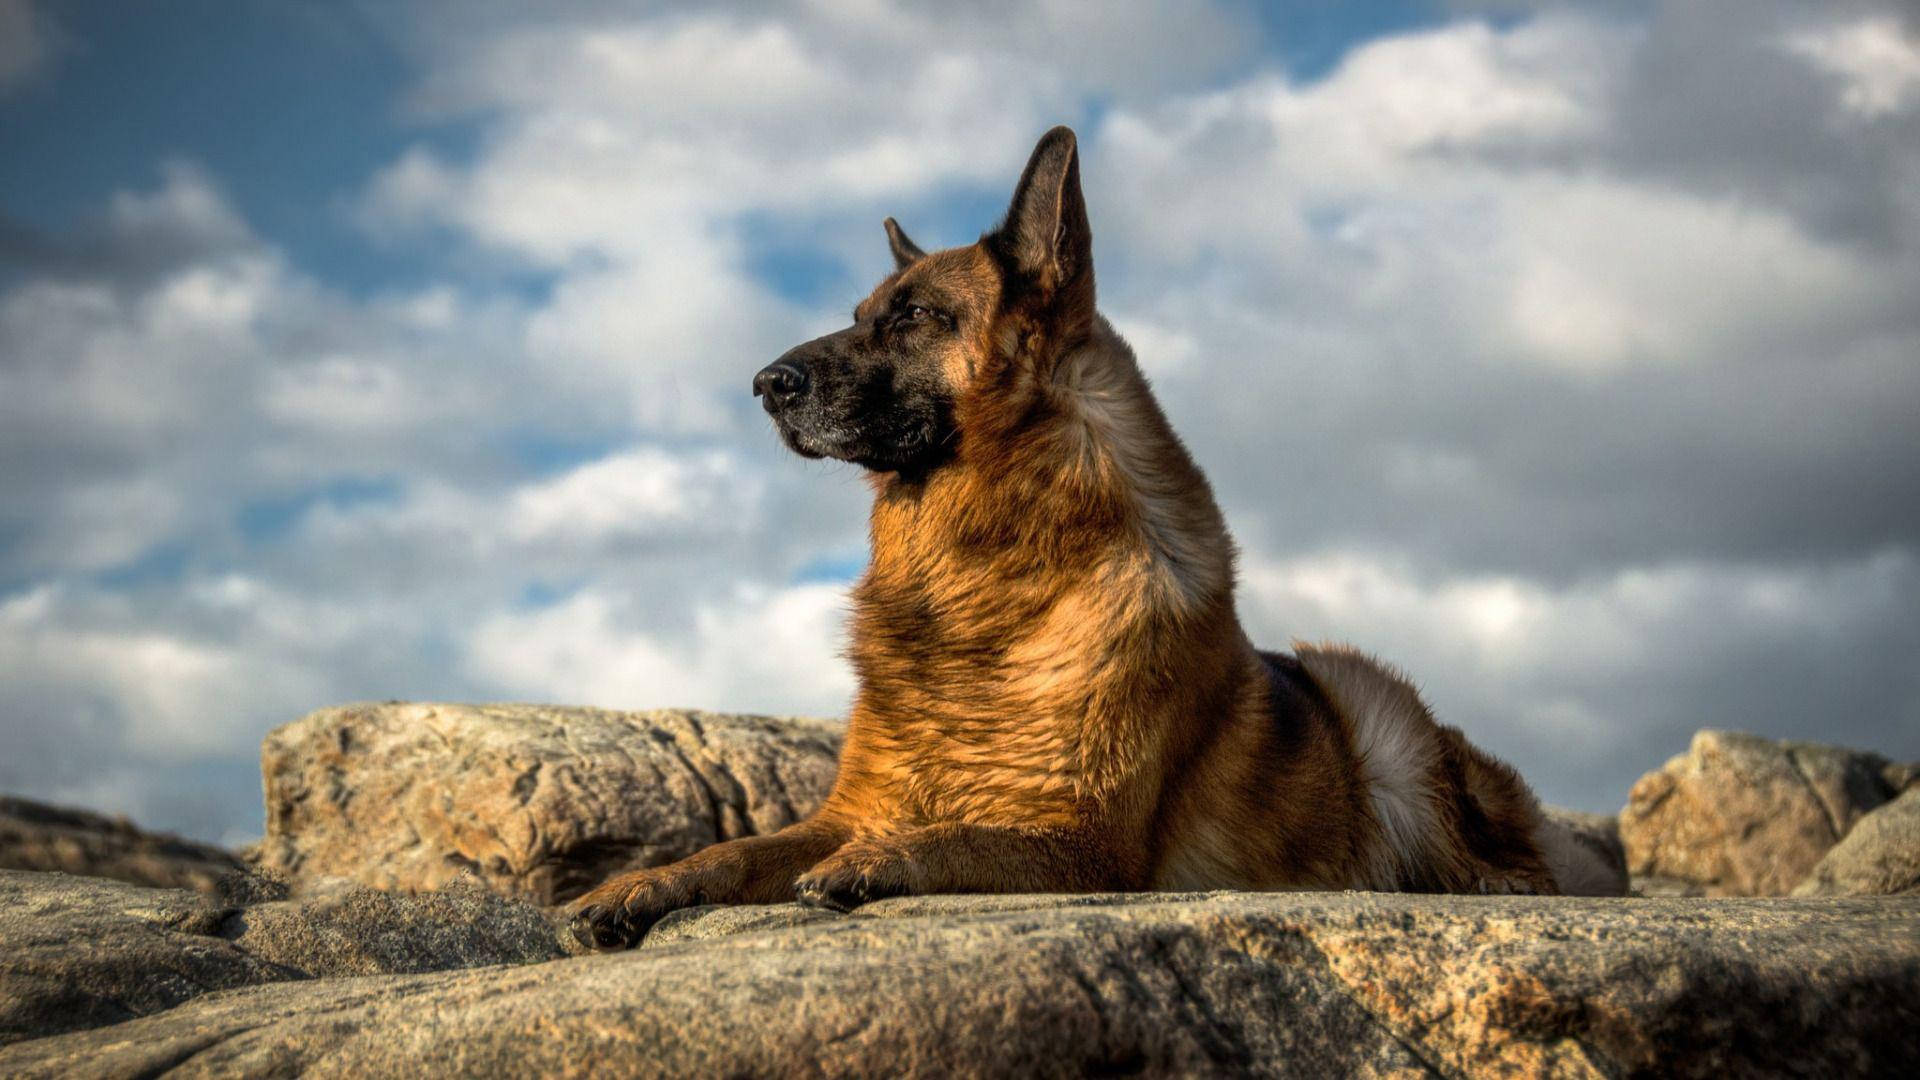 The Majestic German Shepherd Posing In The Great Outdoors. Background